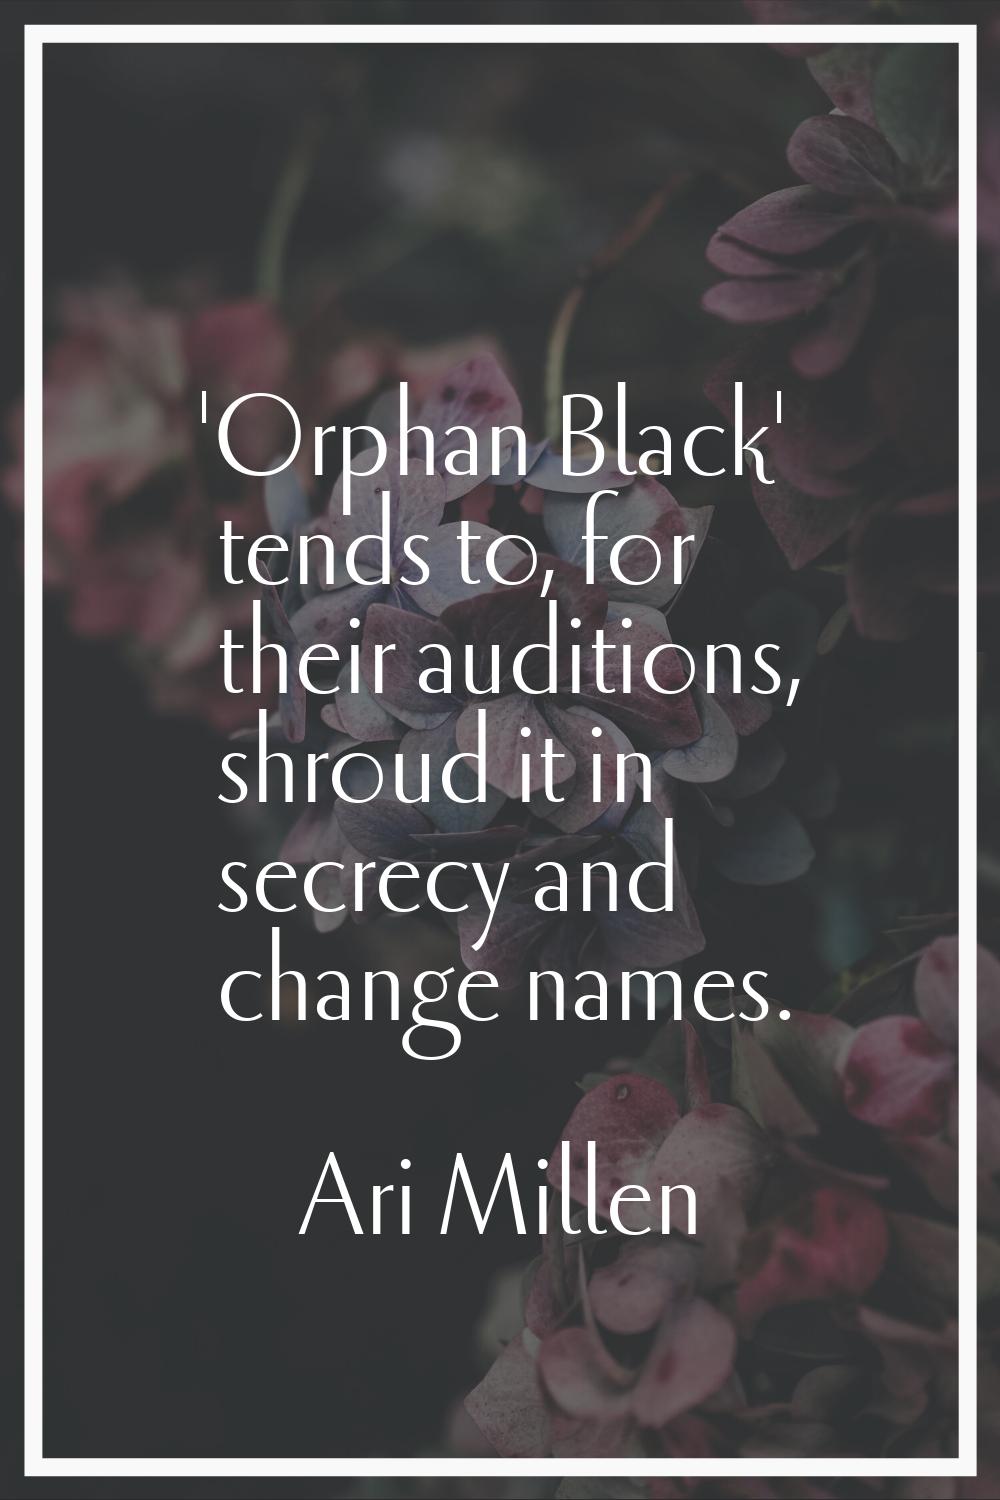 'Orphan Black' tends to, for their auditions, shroud it in secrecy and change names.